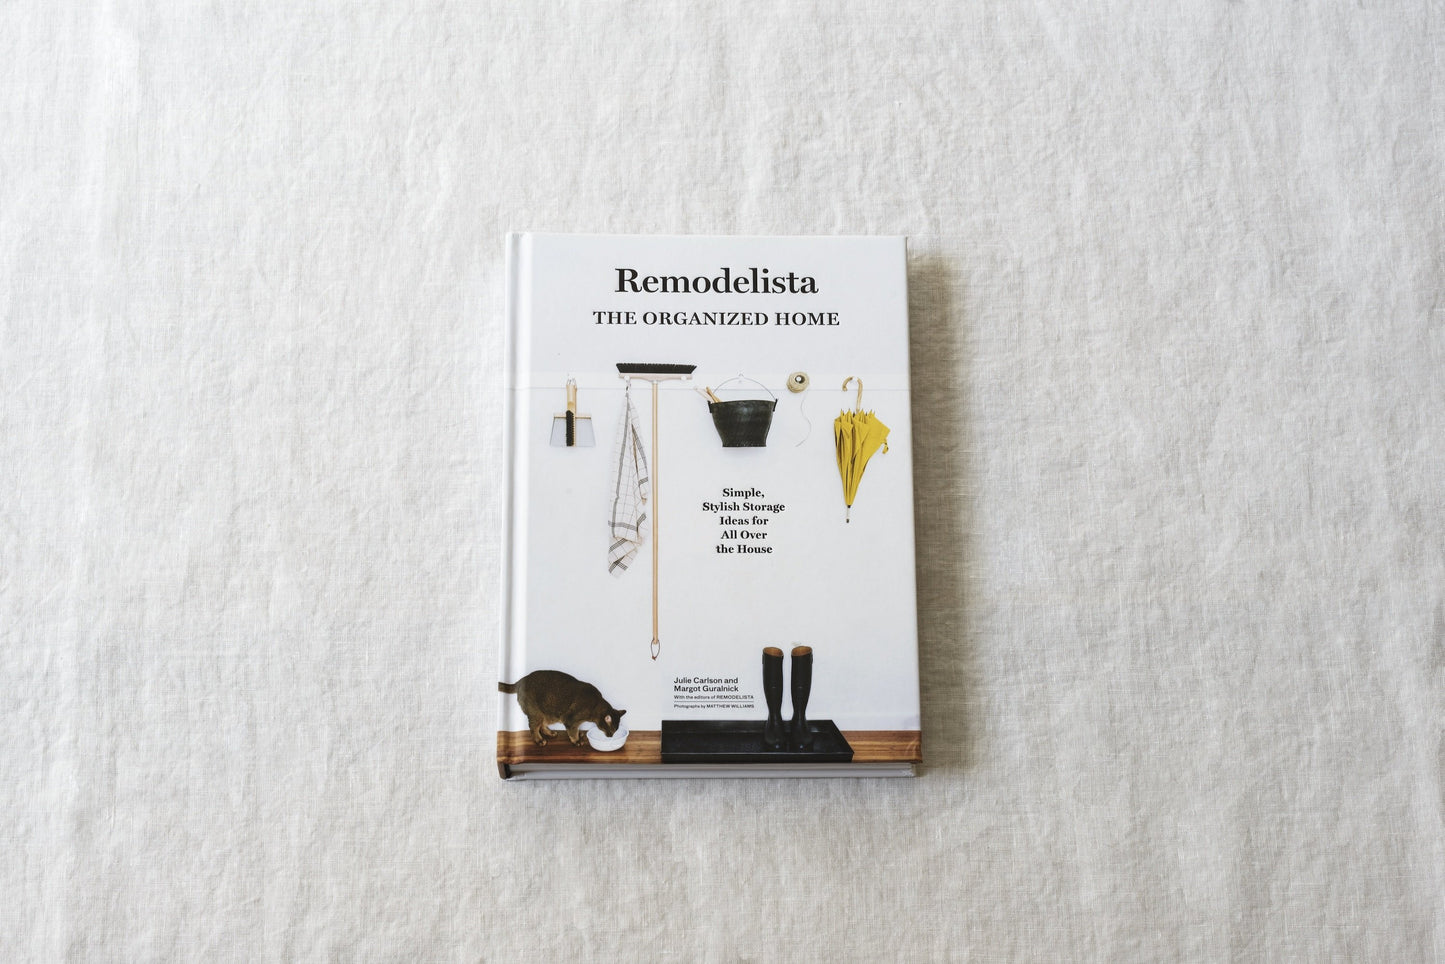 Remodelista, The Organized Home